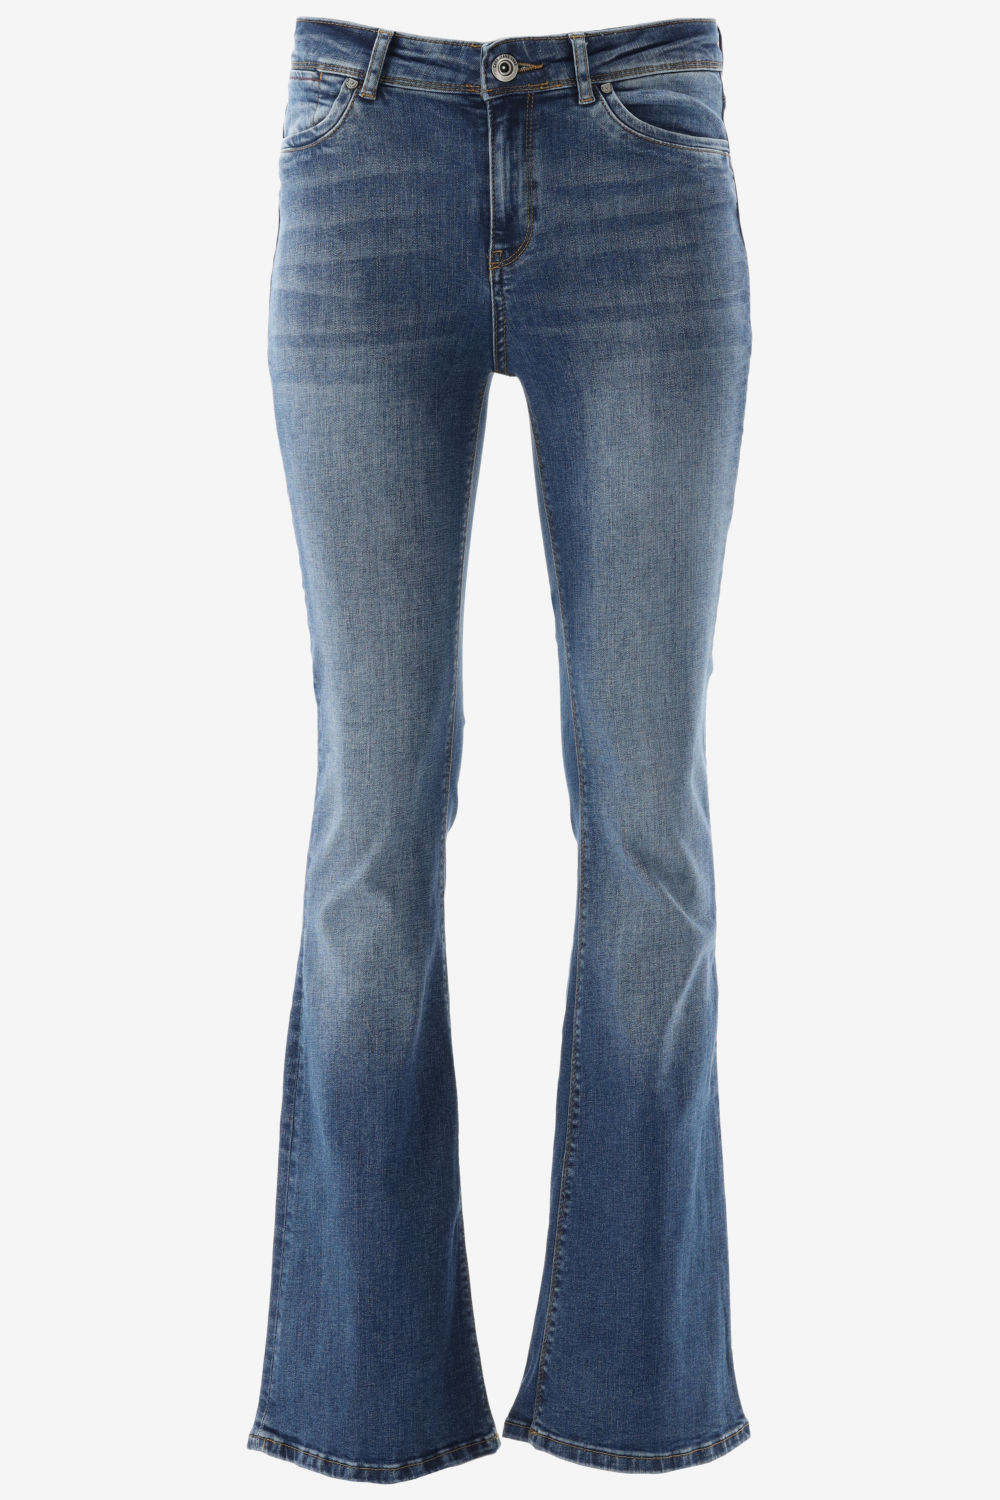 Cars Jeans Michelle Flare Den 78627 Stone Used Dames Maat - W28 X L32